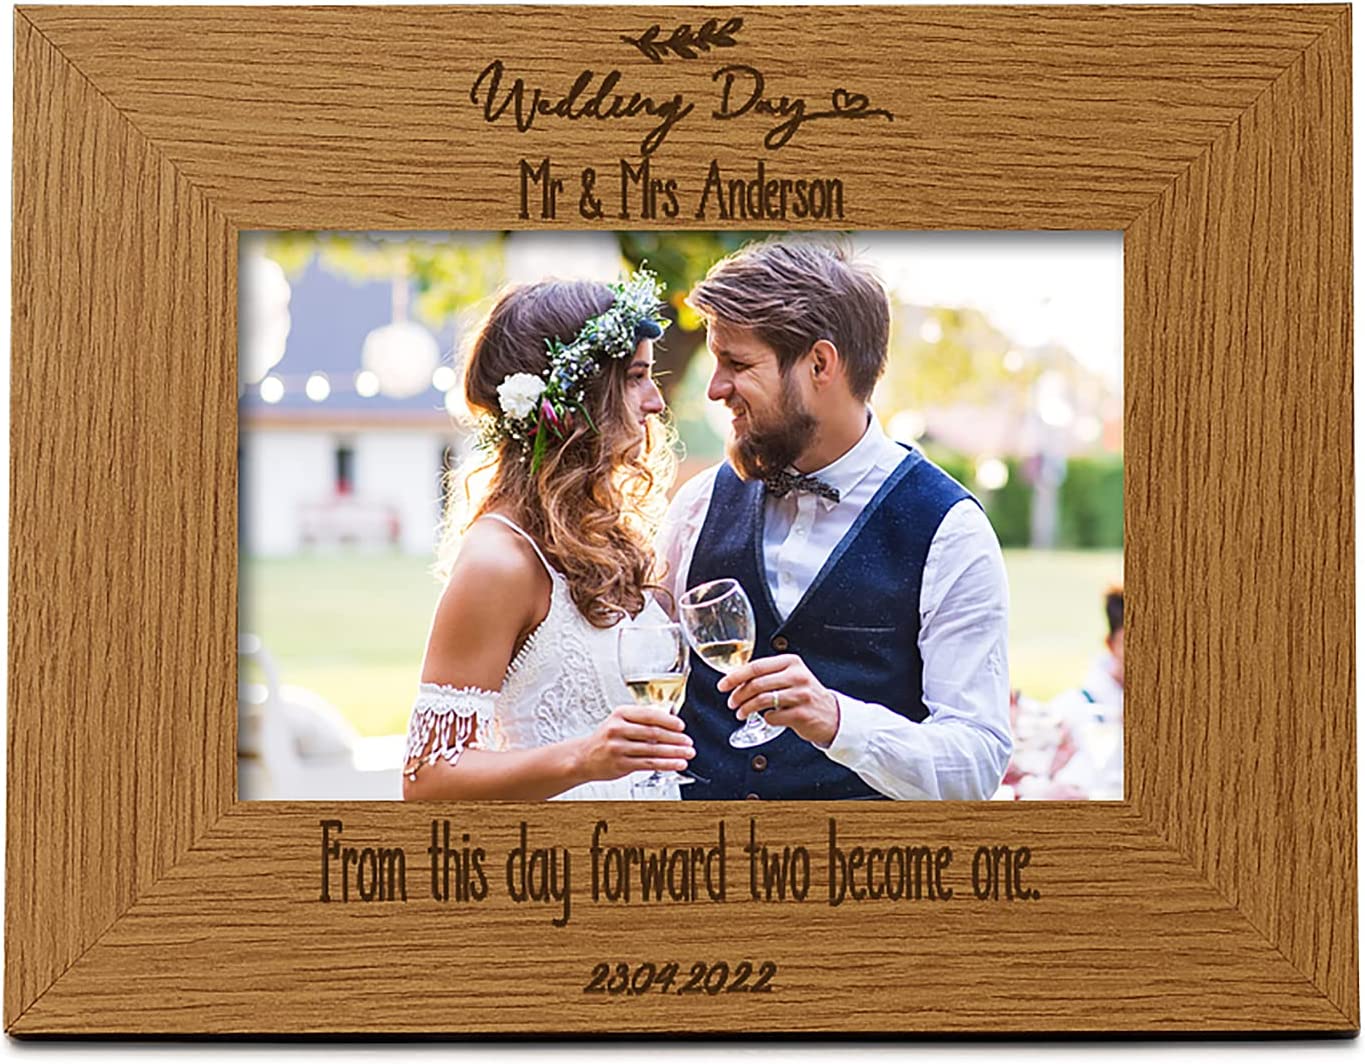 Personalised Wedding Day Photo Picture Frame Landscape With Sentiment